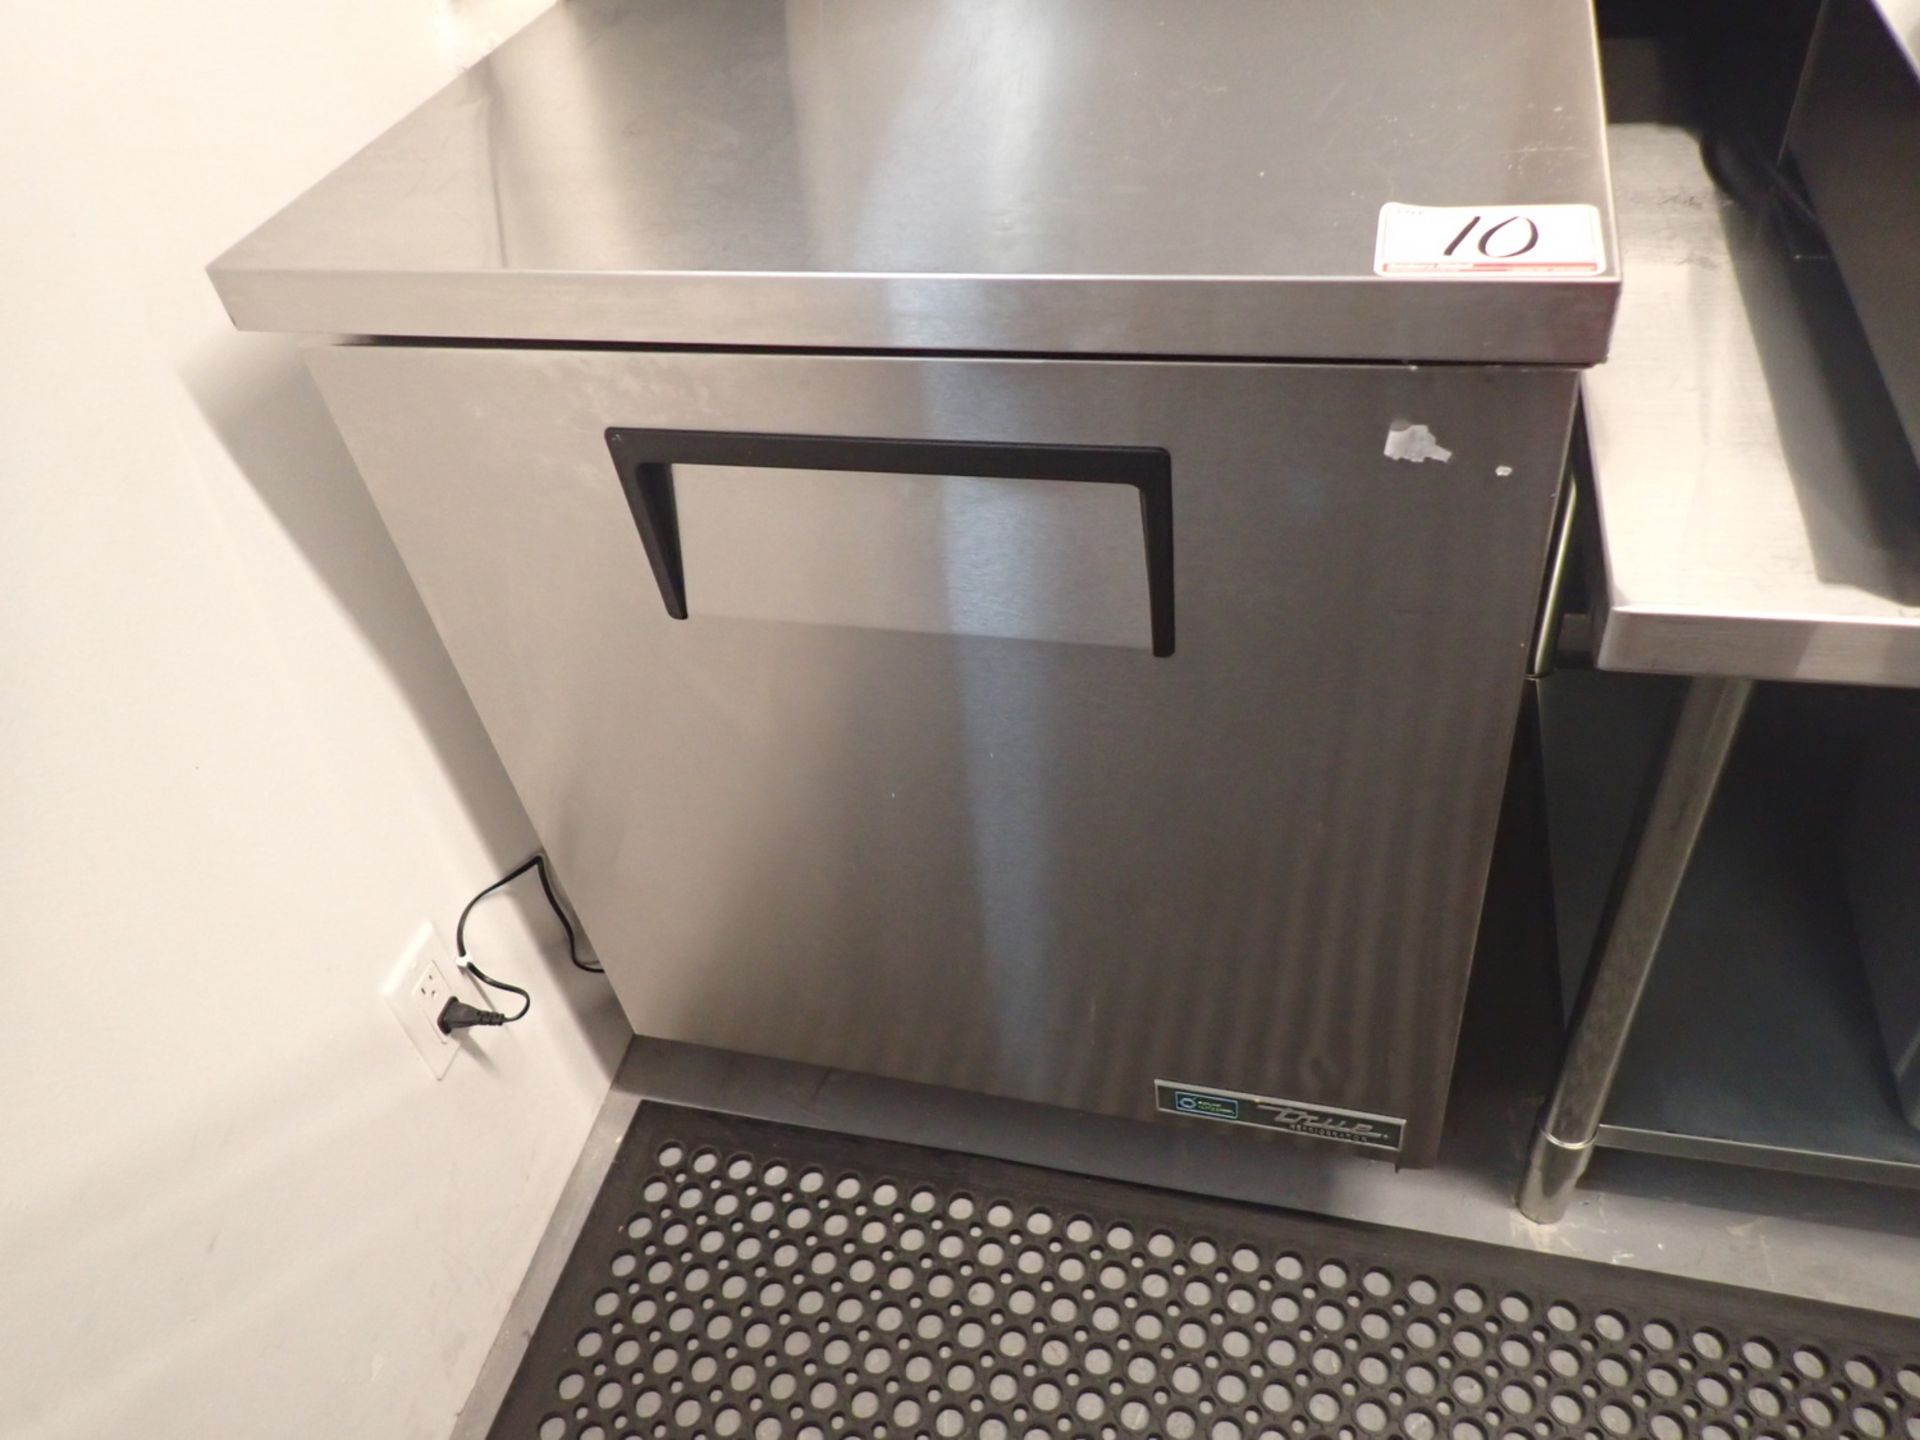 TRUE TUC-27-LP-HC 27" 1-DOOR UNDERCOUNTER STAINLESS STEEL REFRIGERATOR (115V) W/ CASTERS - Image 2 of 4